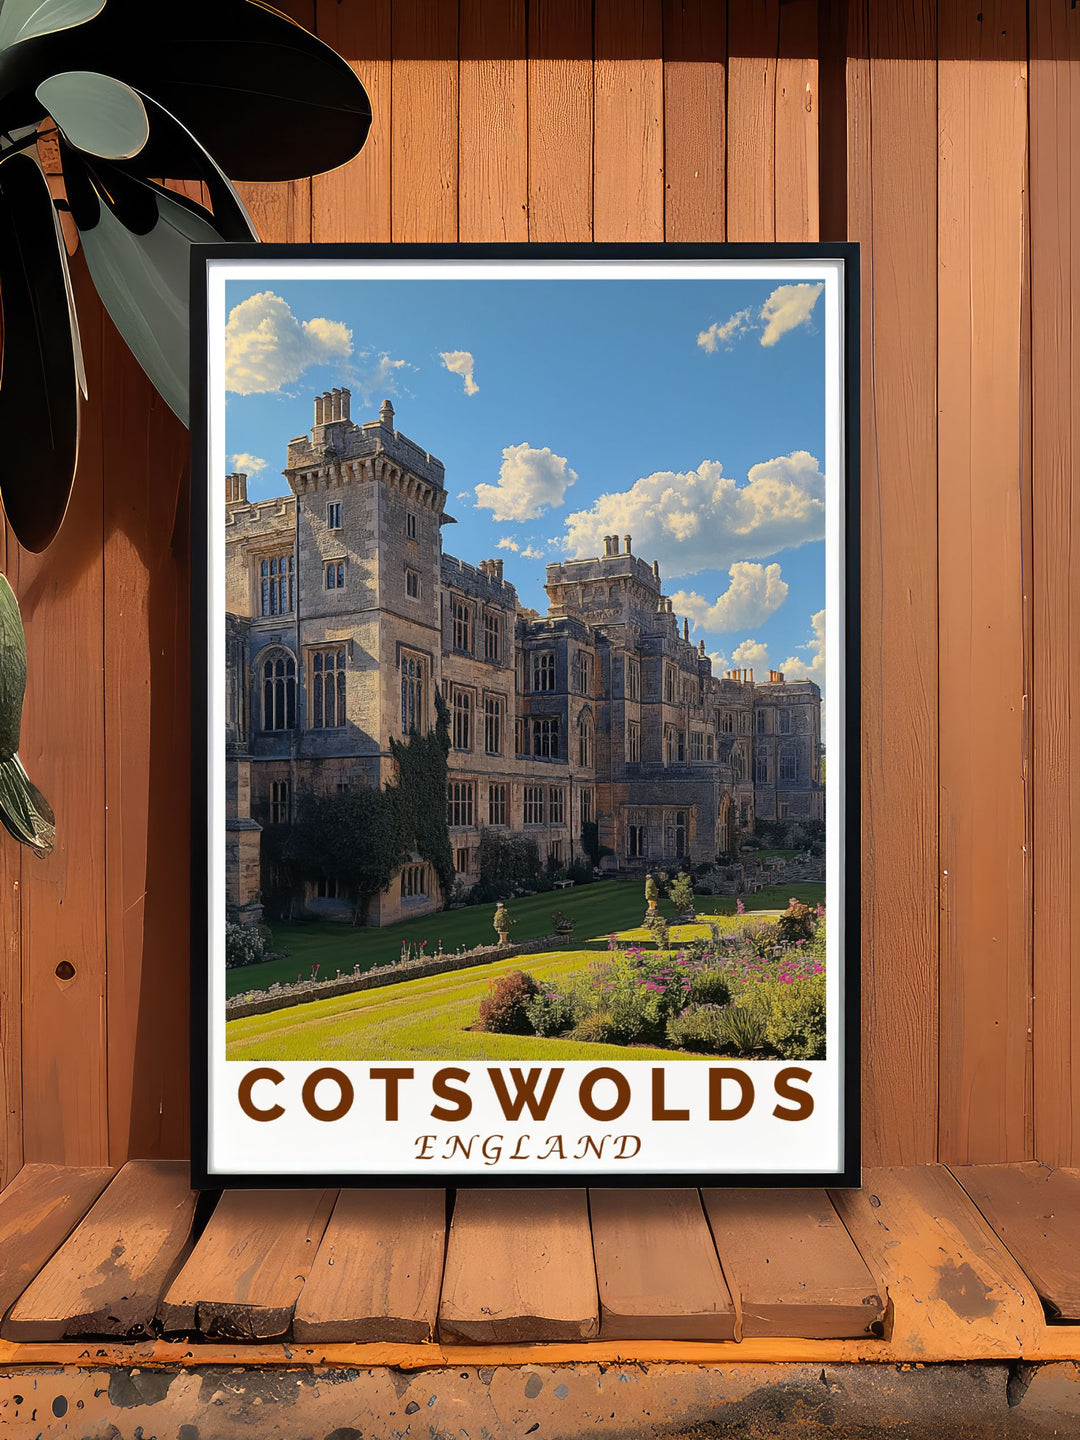 The captivating blend of nature in the Cotswolds and the historic grandeur of Sudeley Castle is beautifully illustrated in this poster, making it a stunning addition to any wall art collection celebrating England.